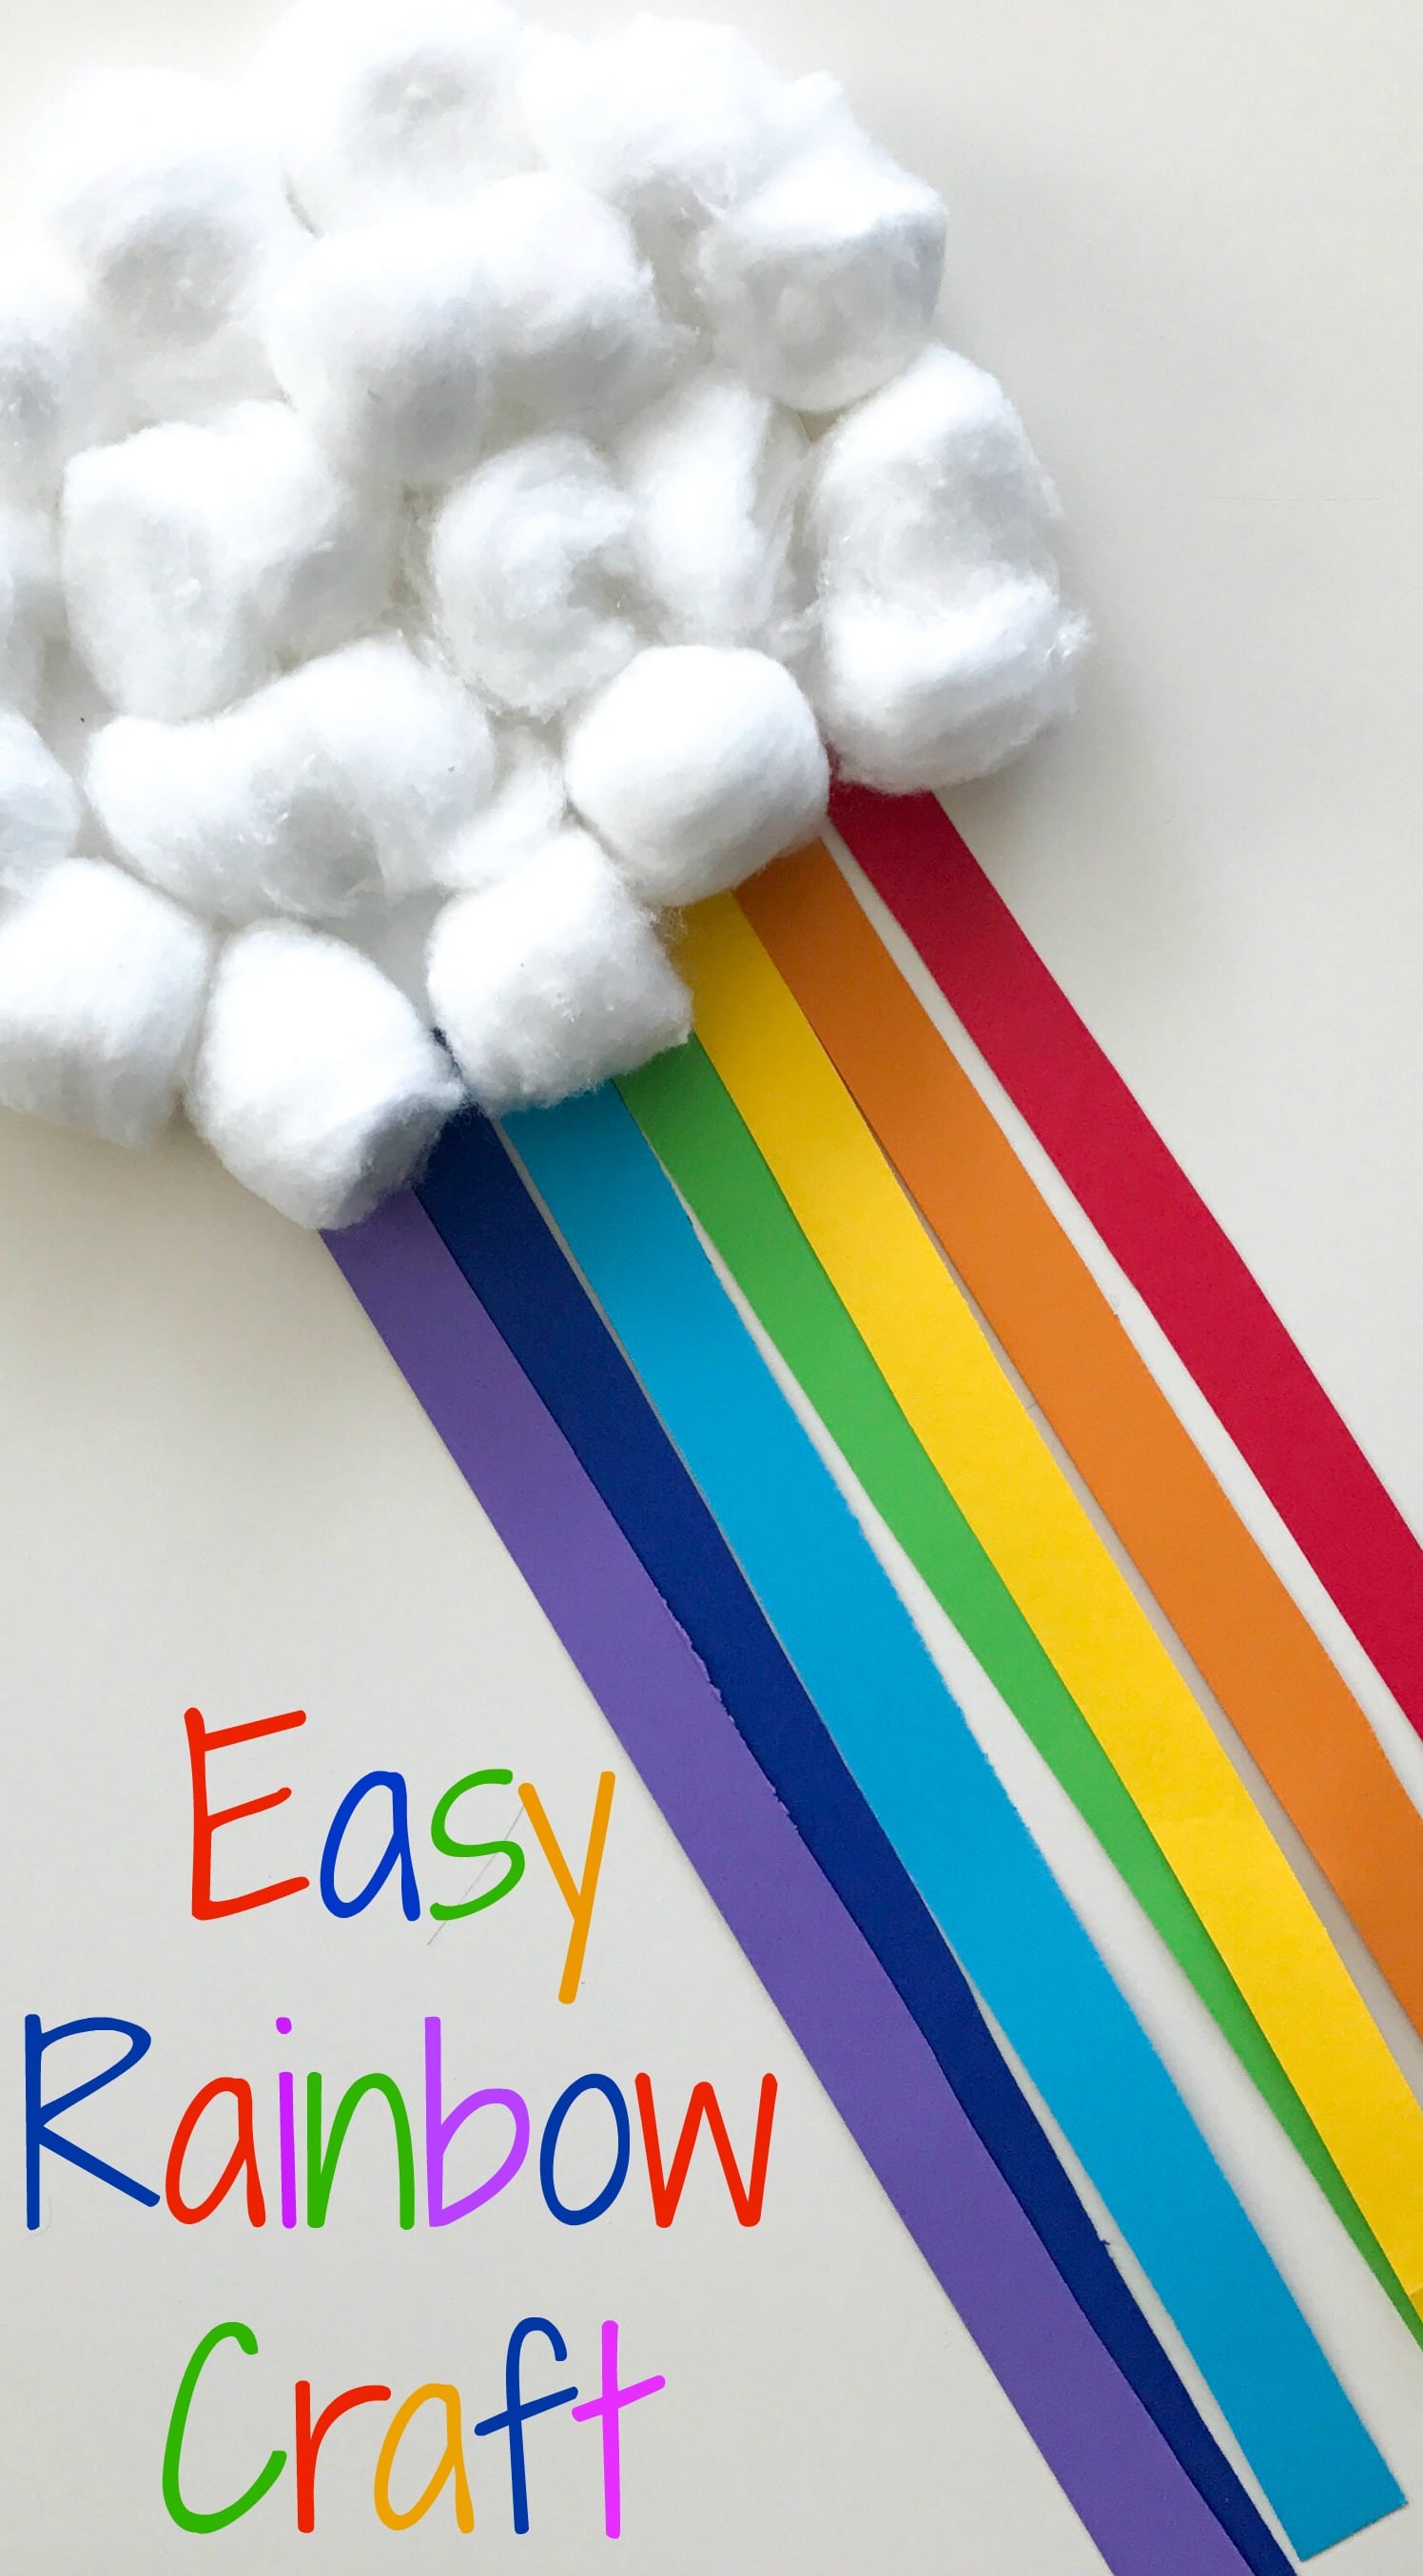 Rainbow Craft with How To Video: Easy Crafts for Kids from The Chirping